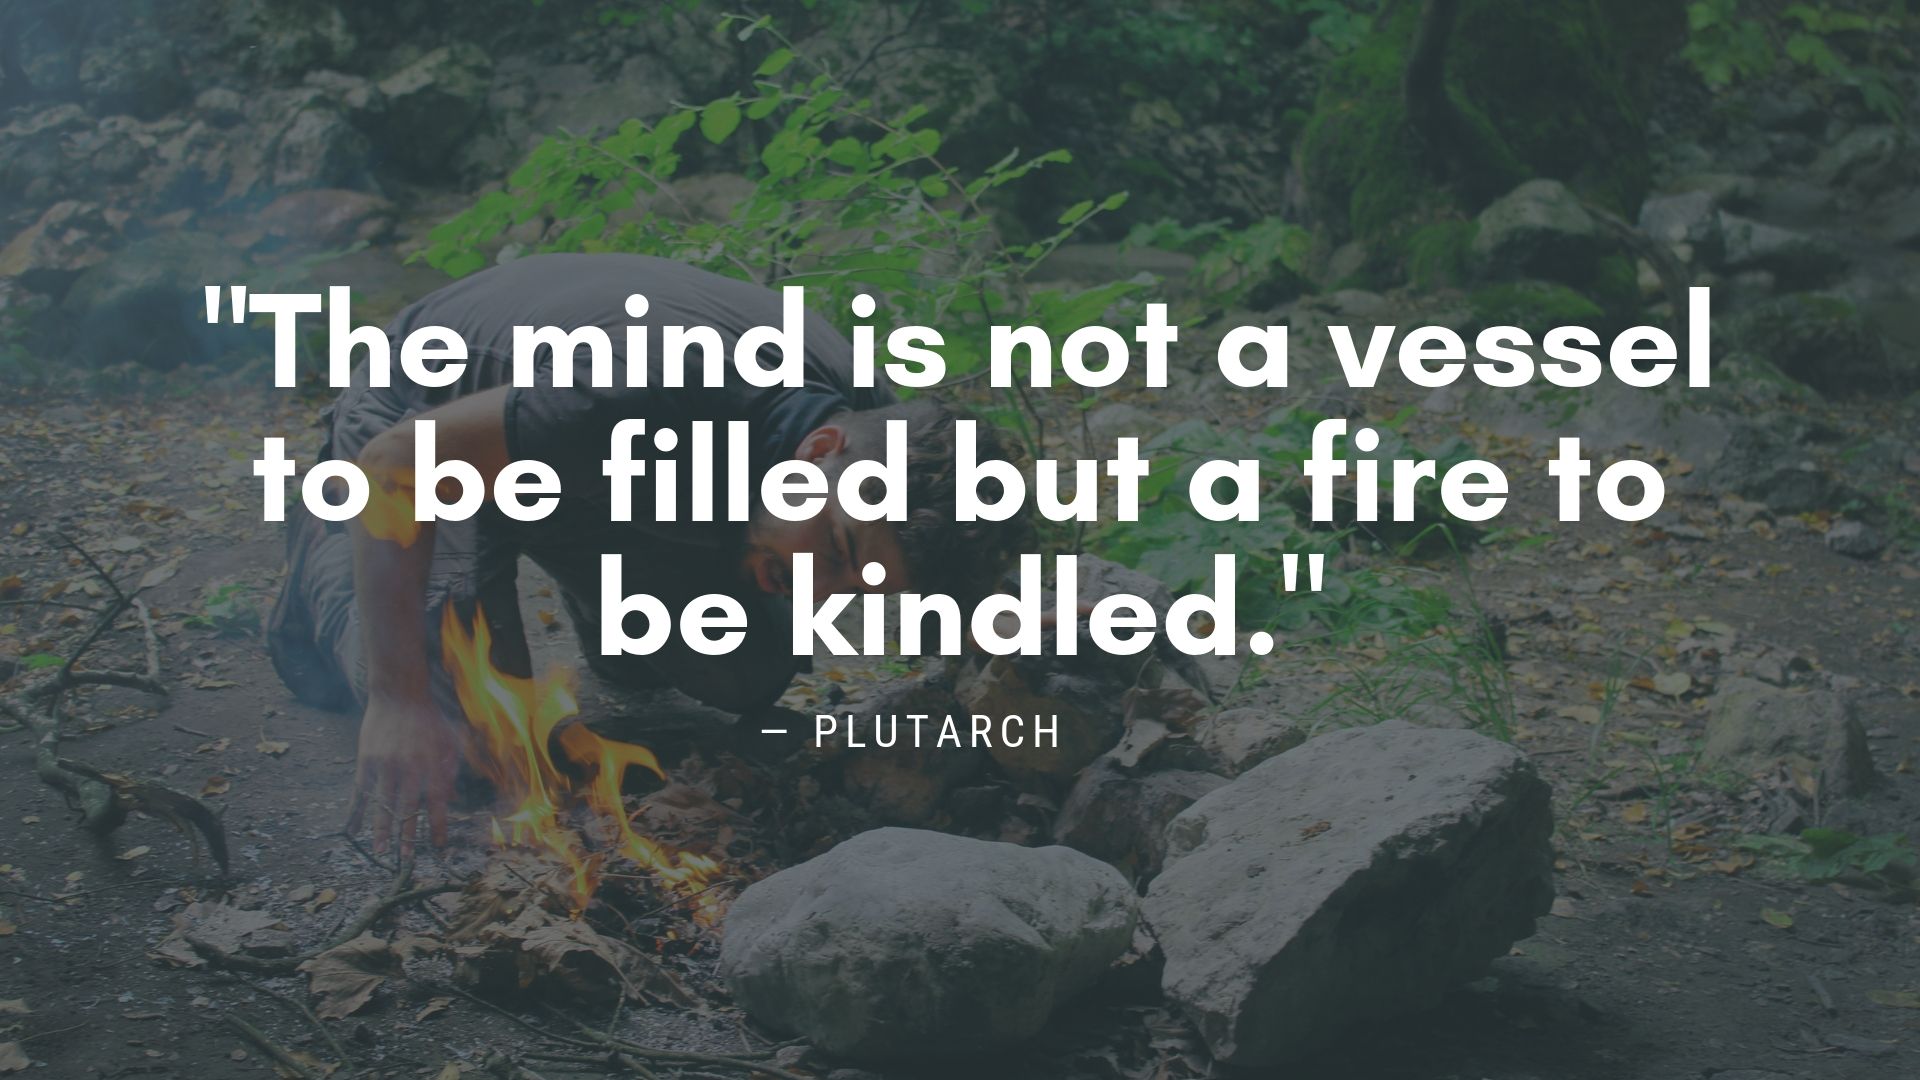 "The mind is not a vessel to be filled but a fire to be kindled." ― Plutarch